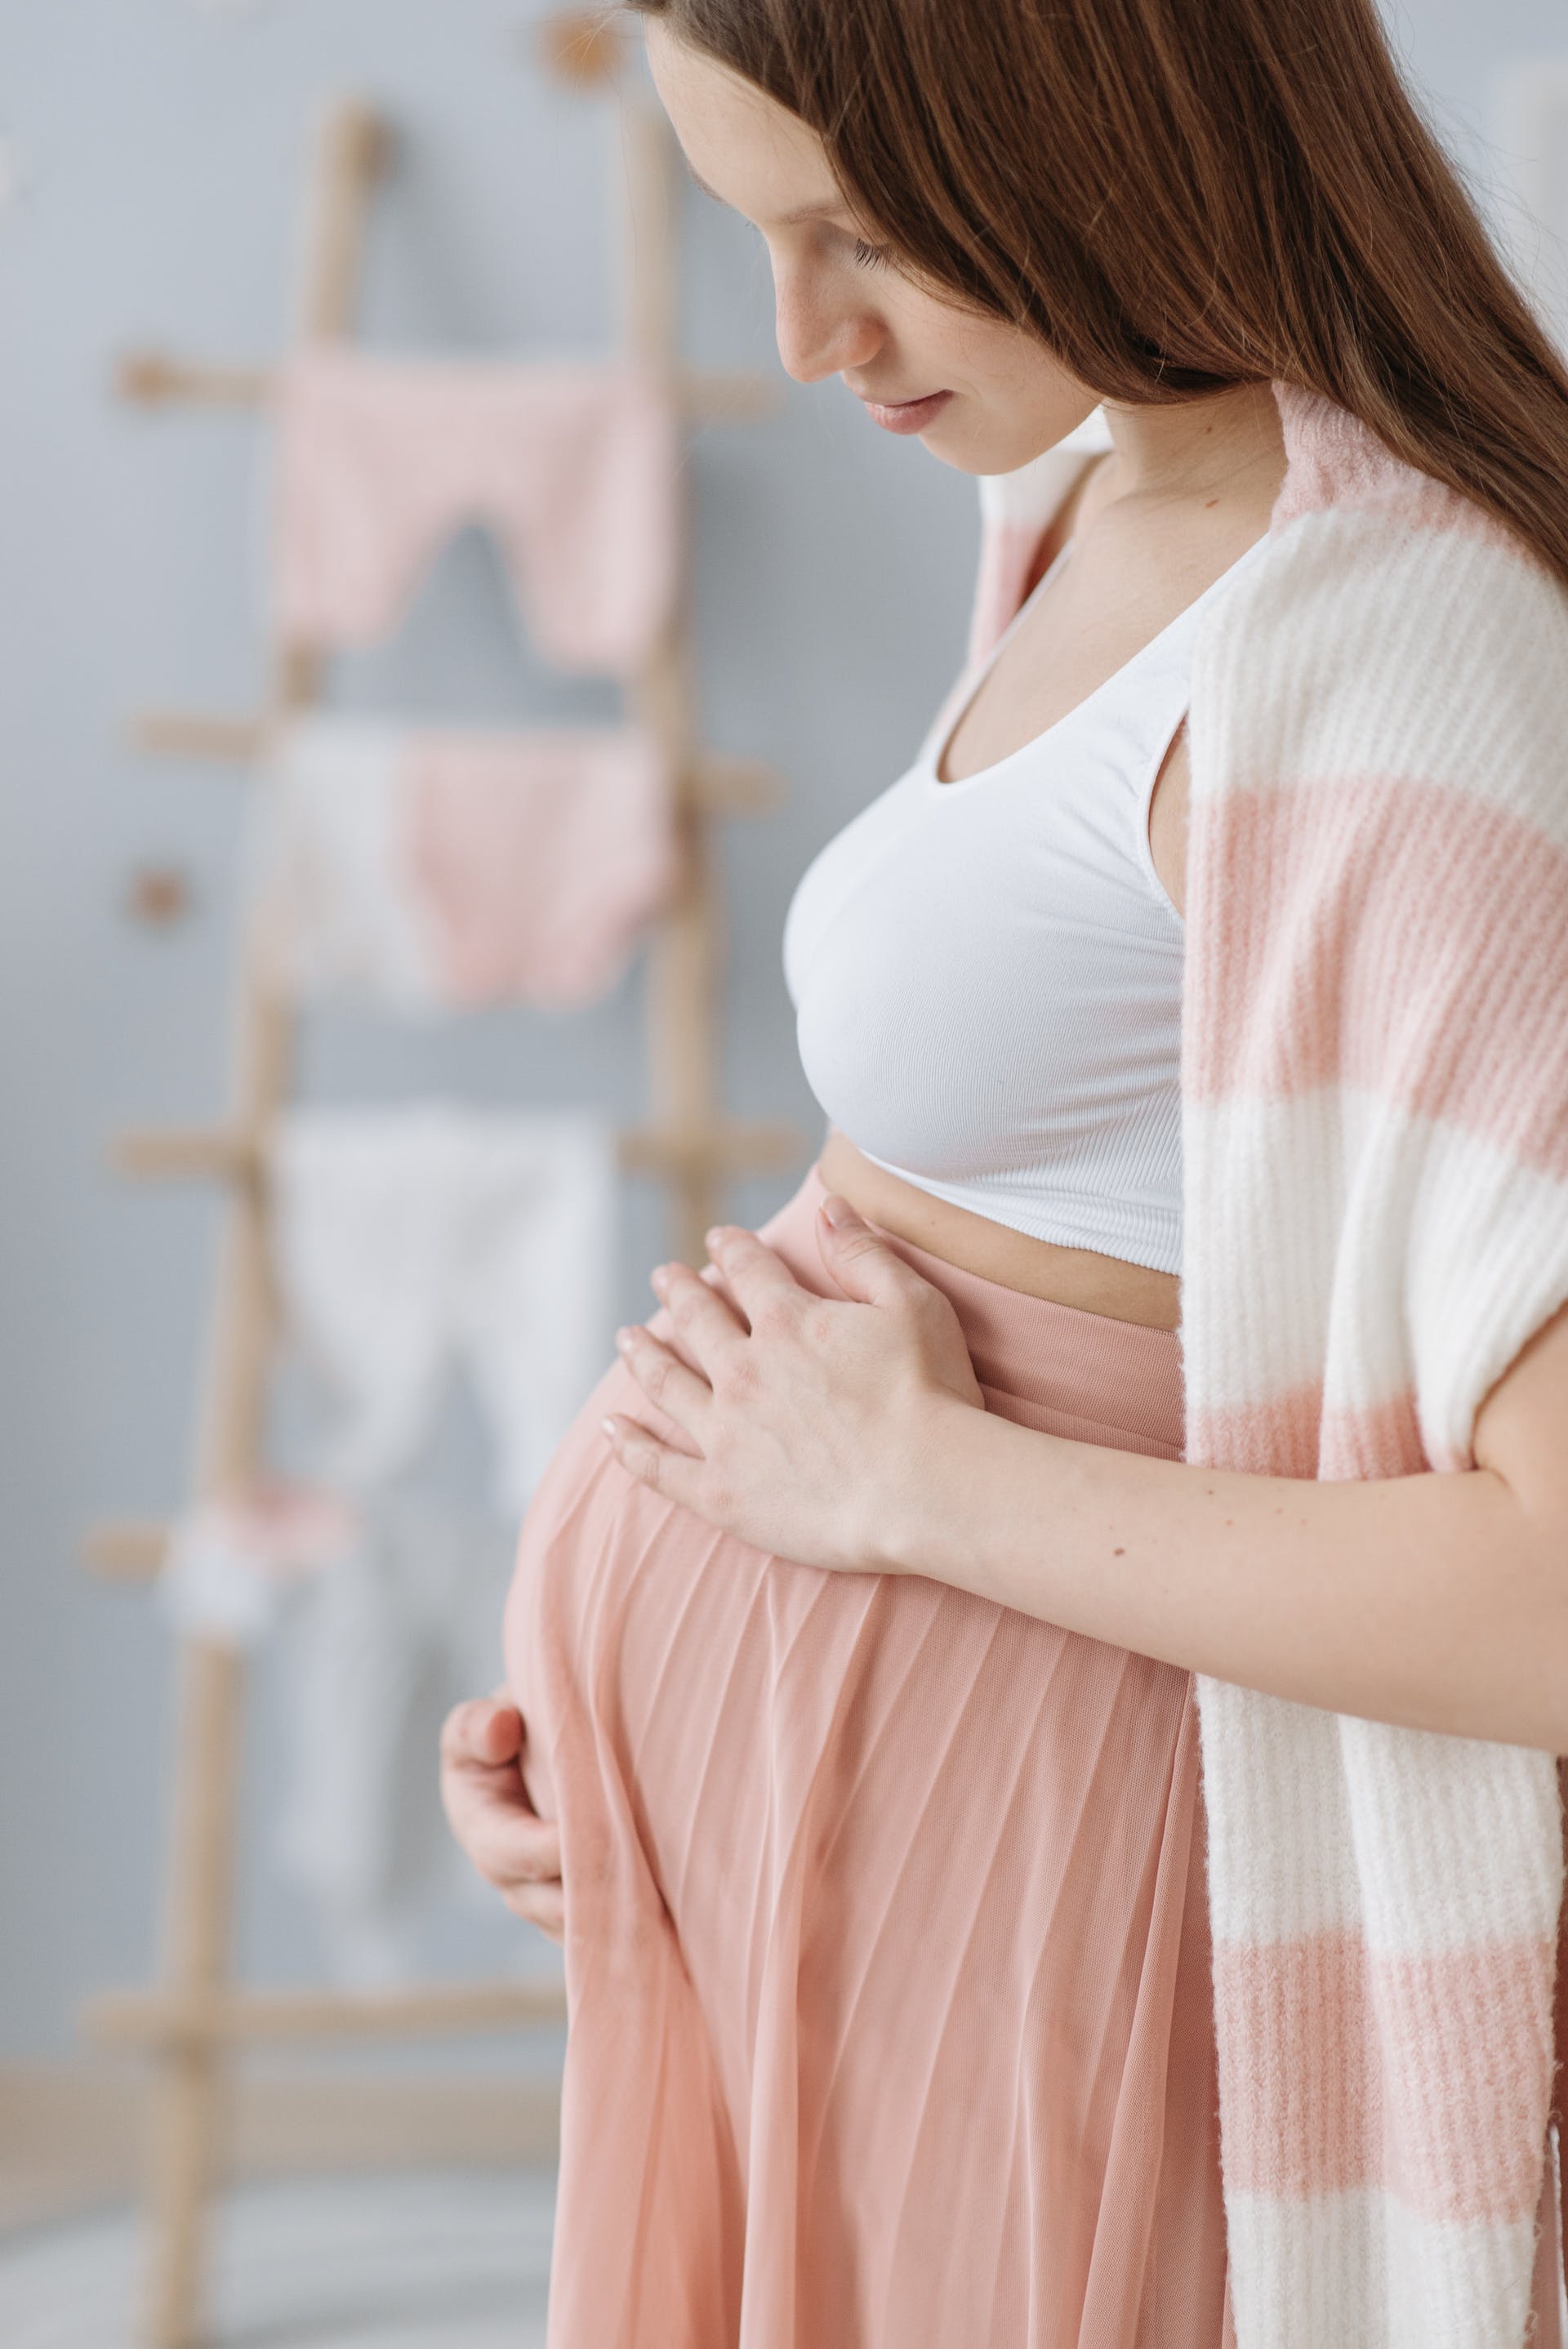 A pregnant woman circling her baby bump | Source: Pexels